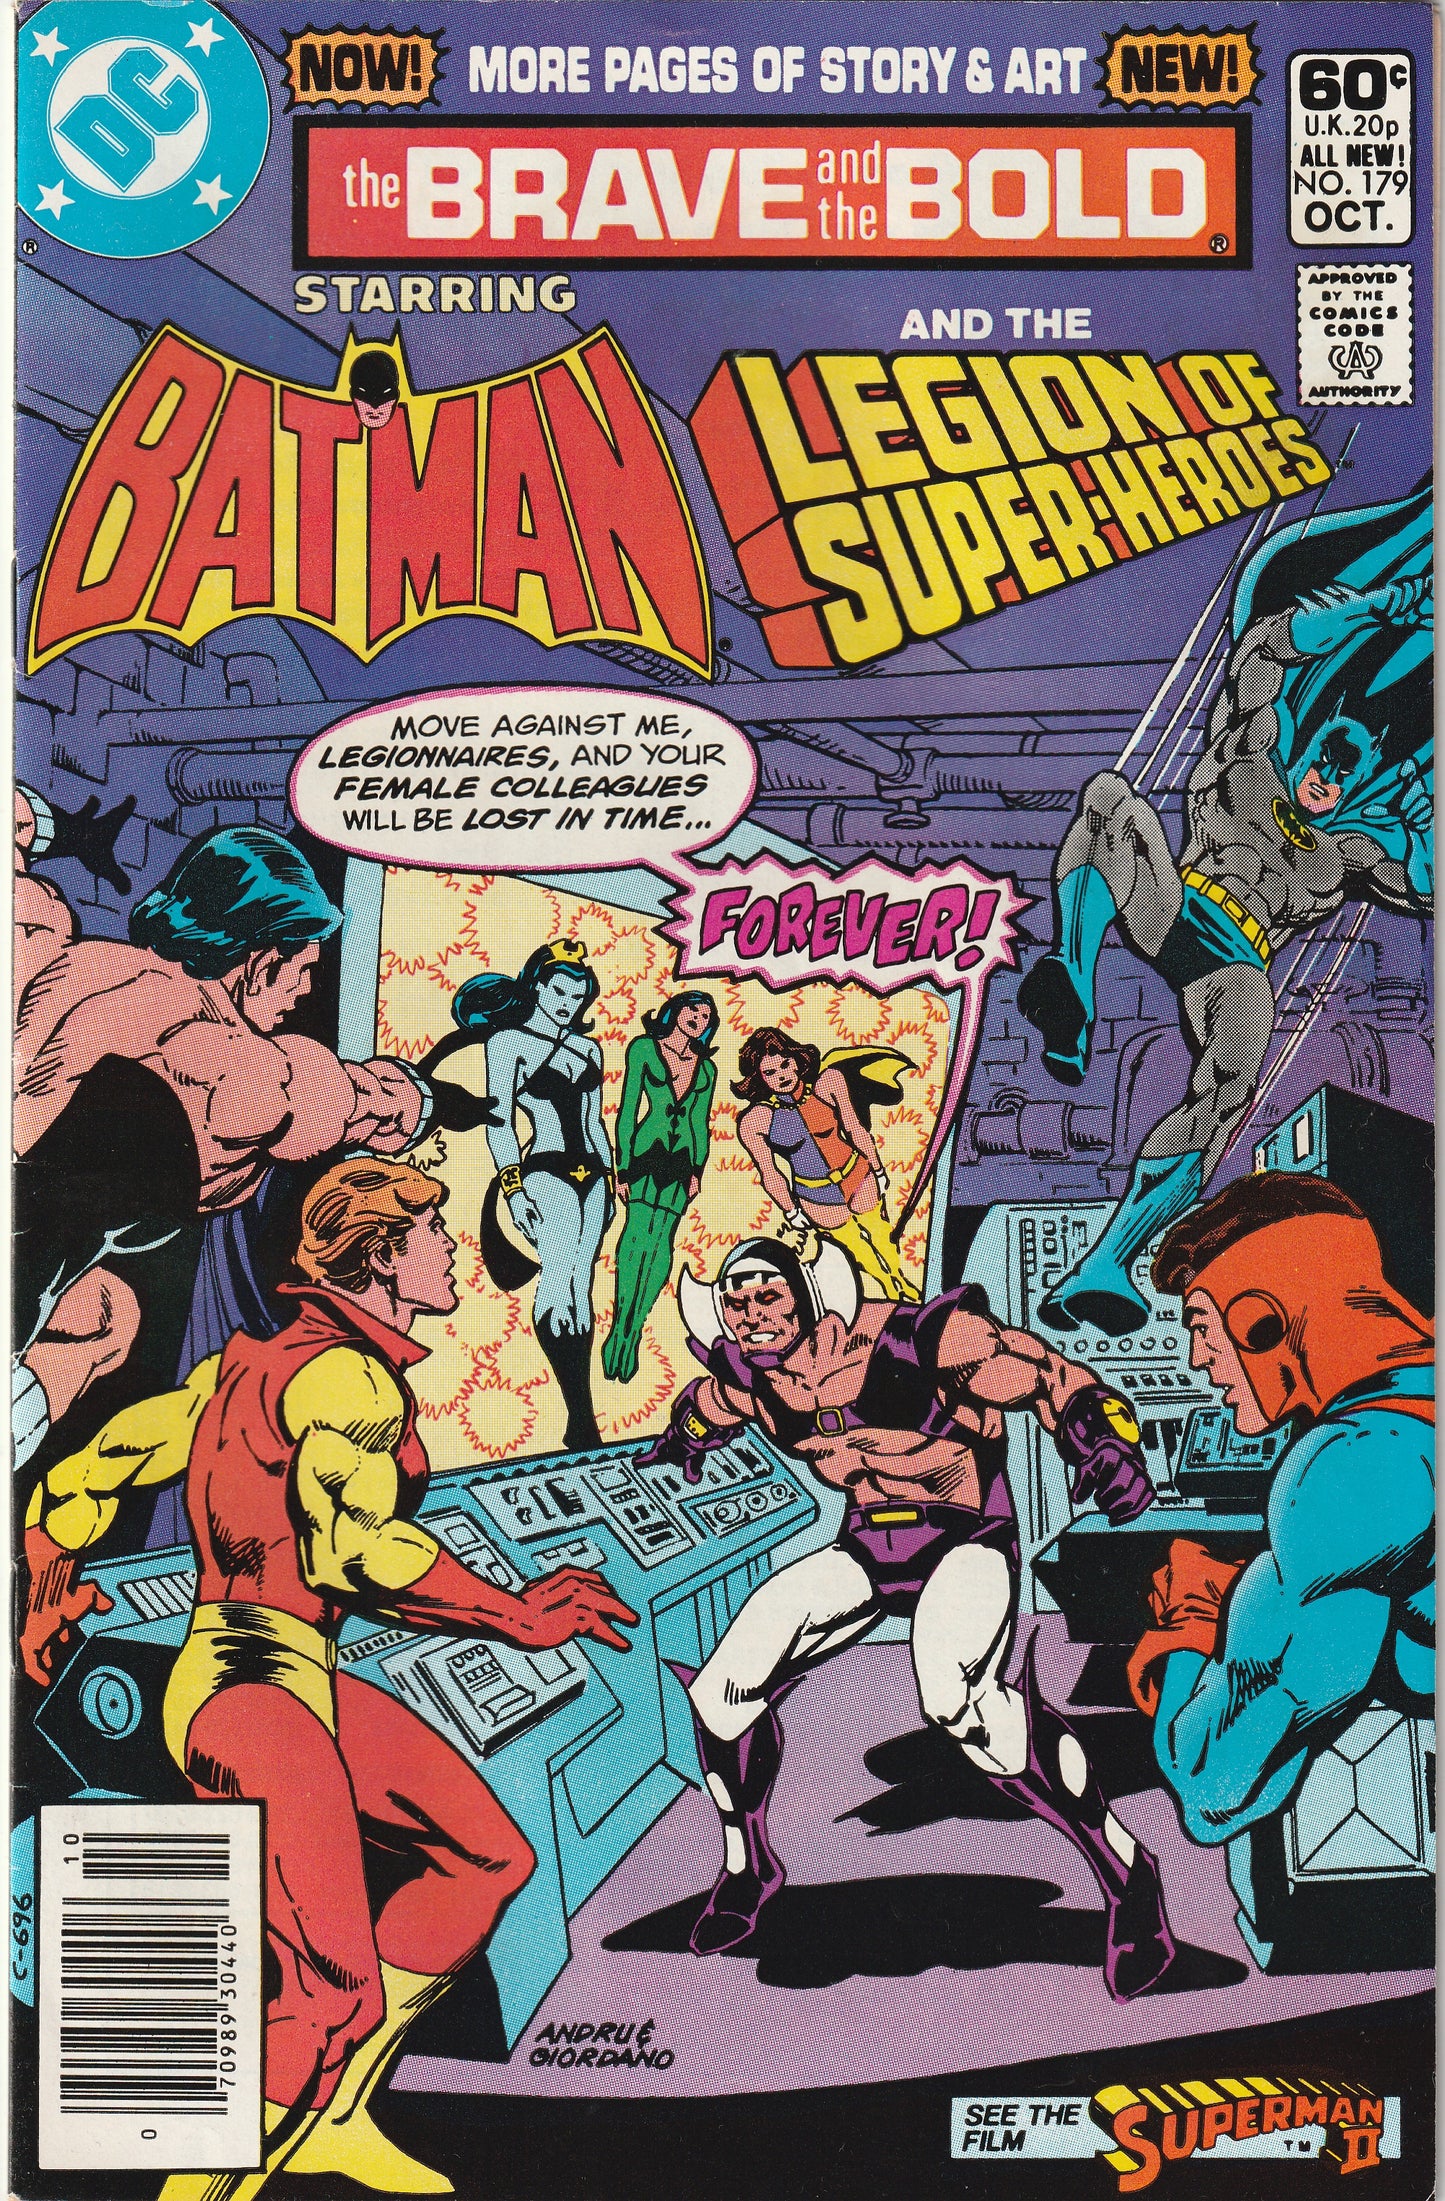 Brave and the Bold #179 (1981) - Batman & Legion of Super-Heroes